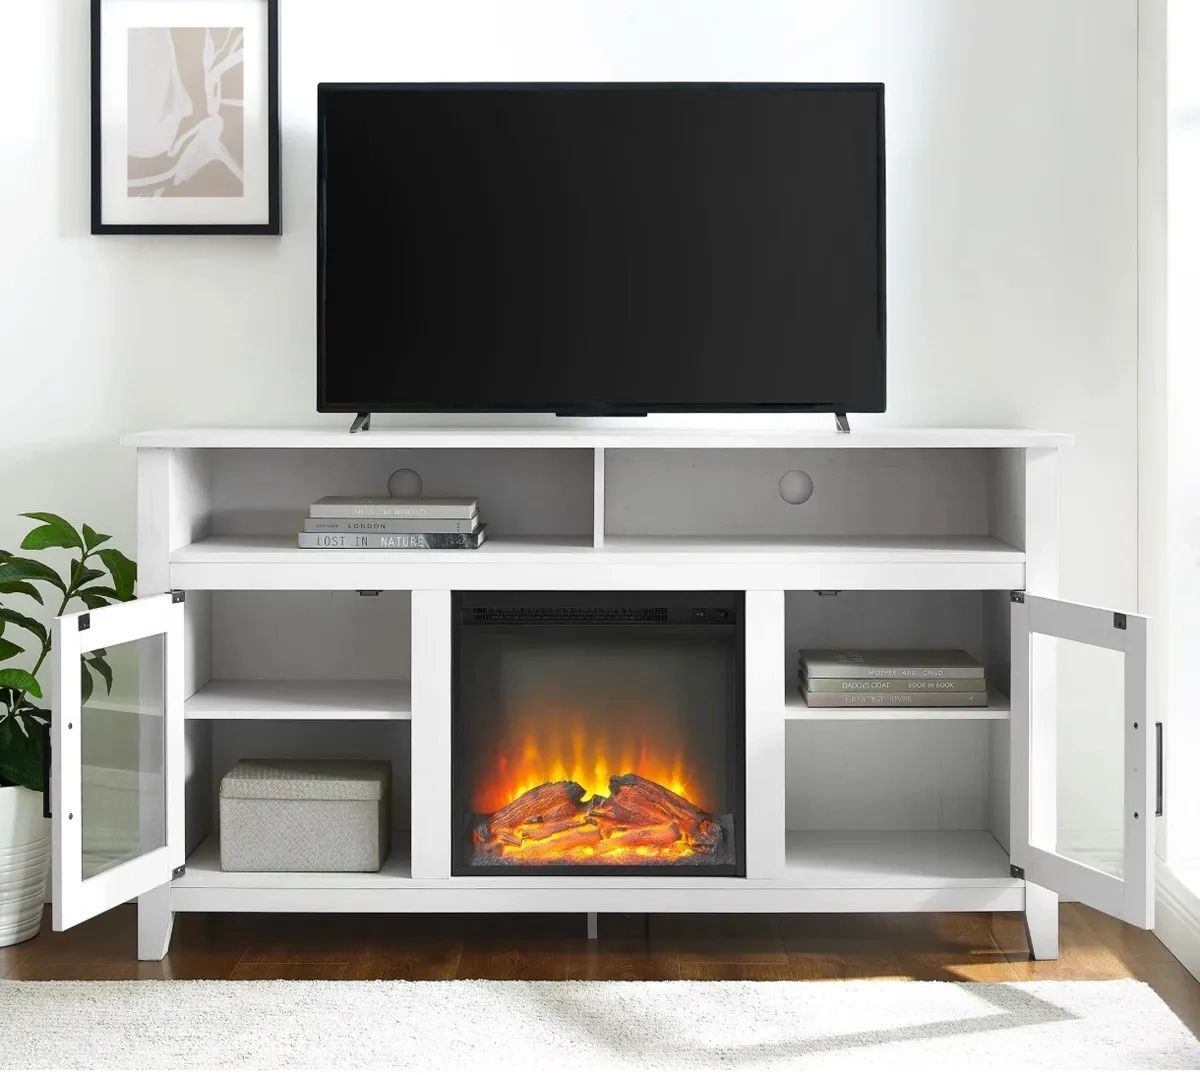 Woven Paths Highboy 2 Door Electric Fireplace Tv Stand For Tvs Up To 65",  Brushe | Ebay In Wood Highboy Fireplace Tv Stands (View 8 of 15)